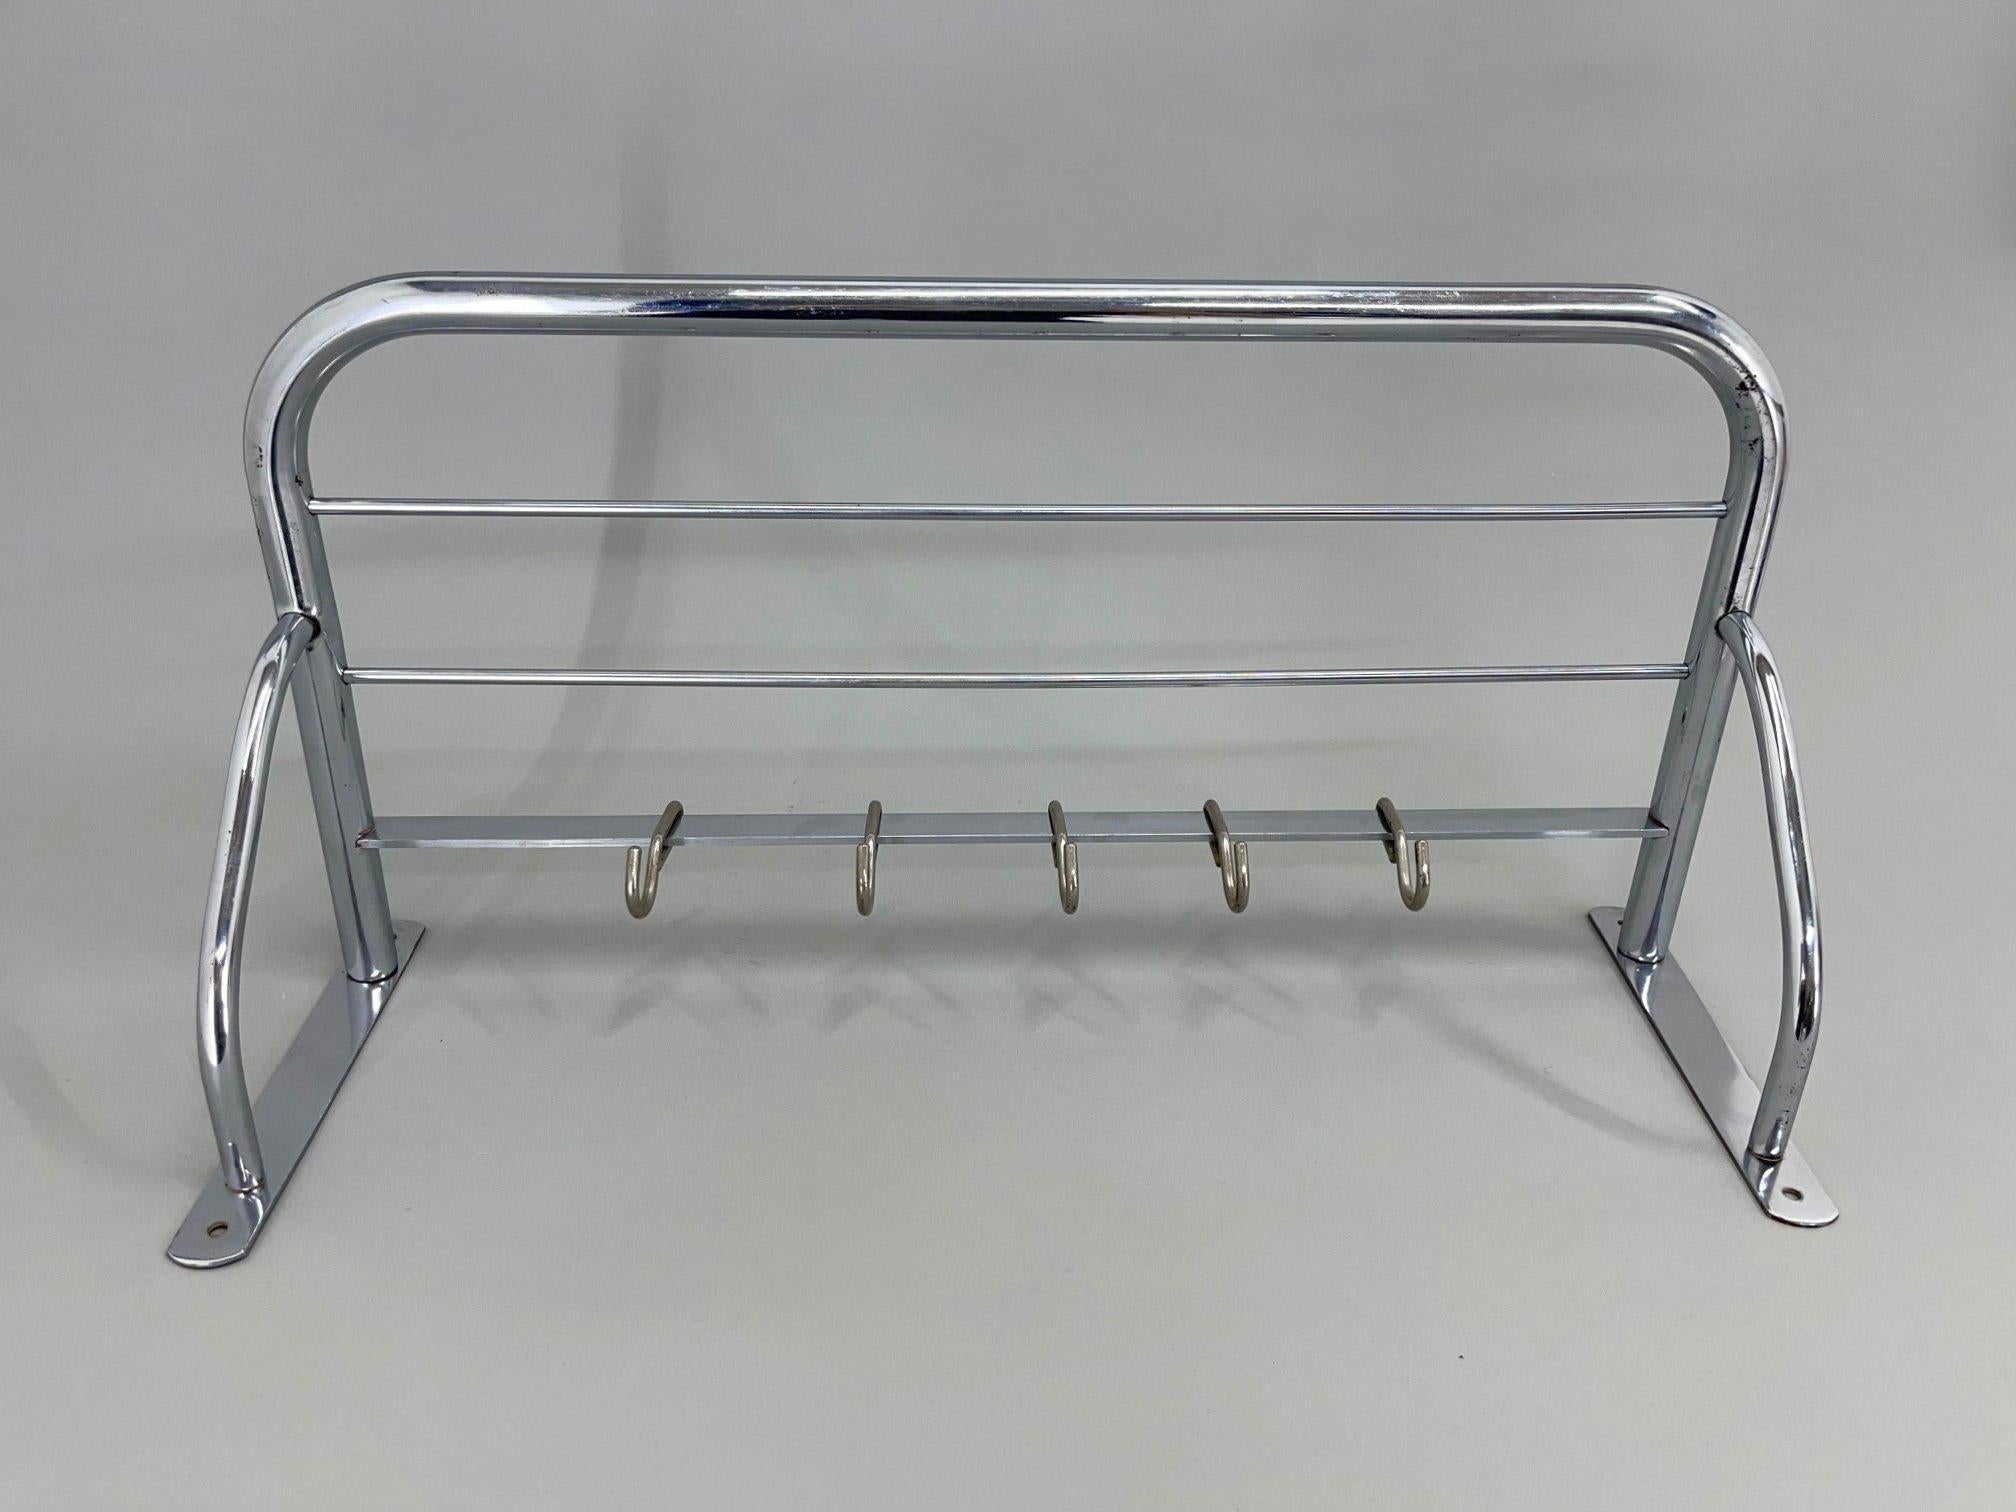 Mid-20th Century 1930's Bauhaus or Functionalist Chrome Wall Coat Hanger For Sale